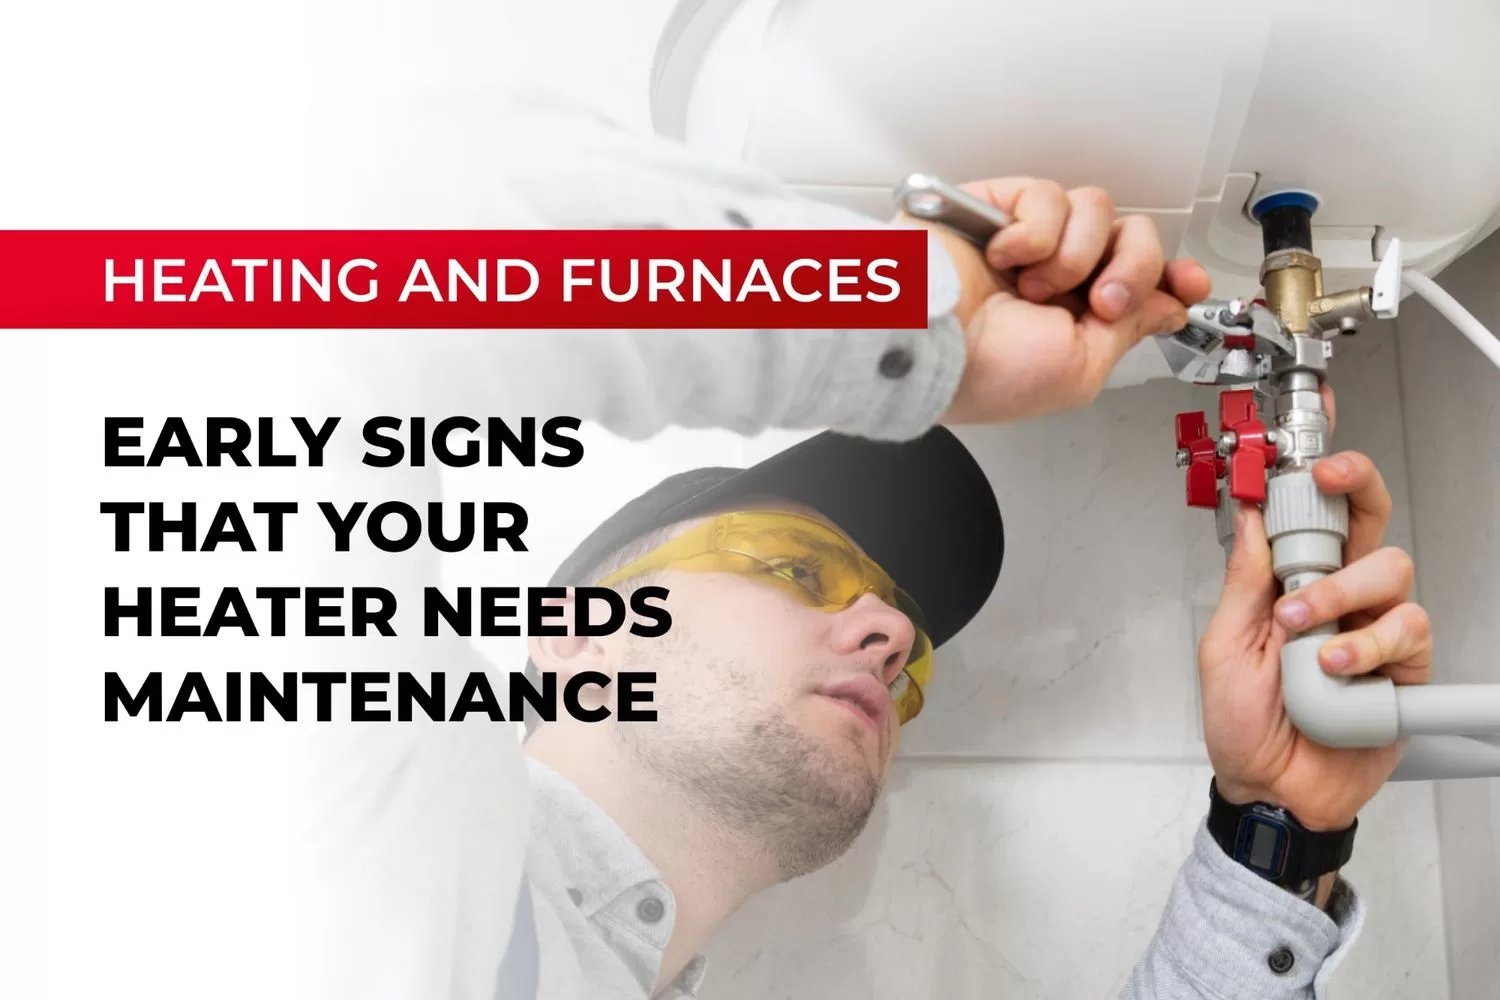 Early Signs That Your Heater Needs Maintenance